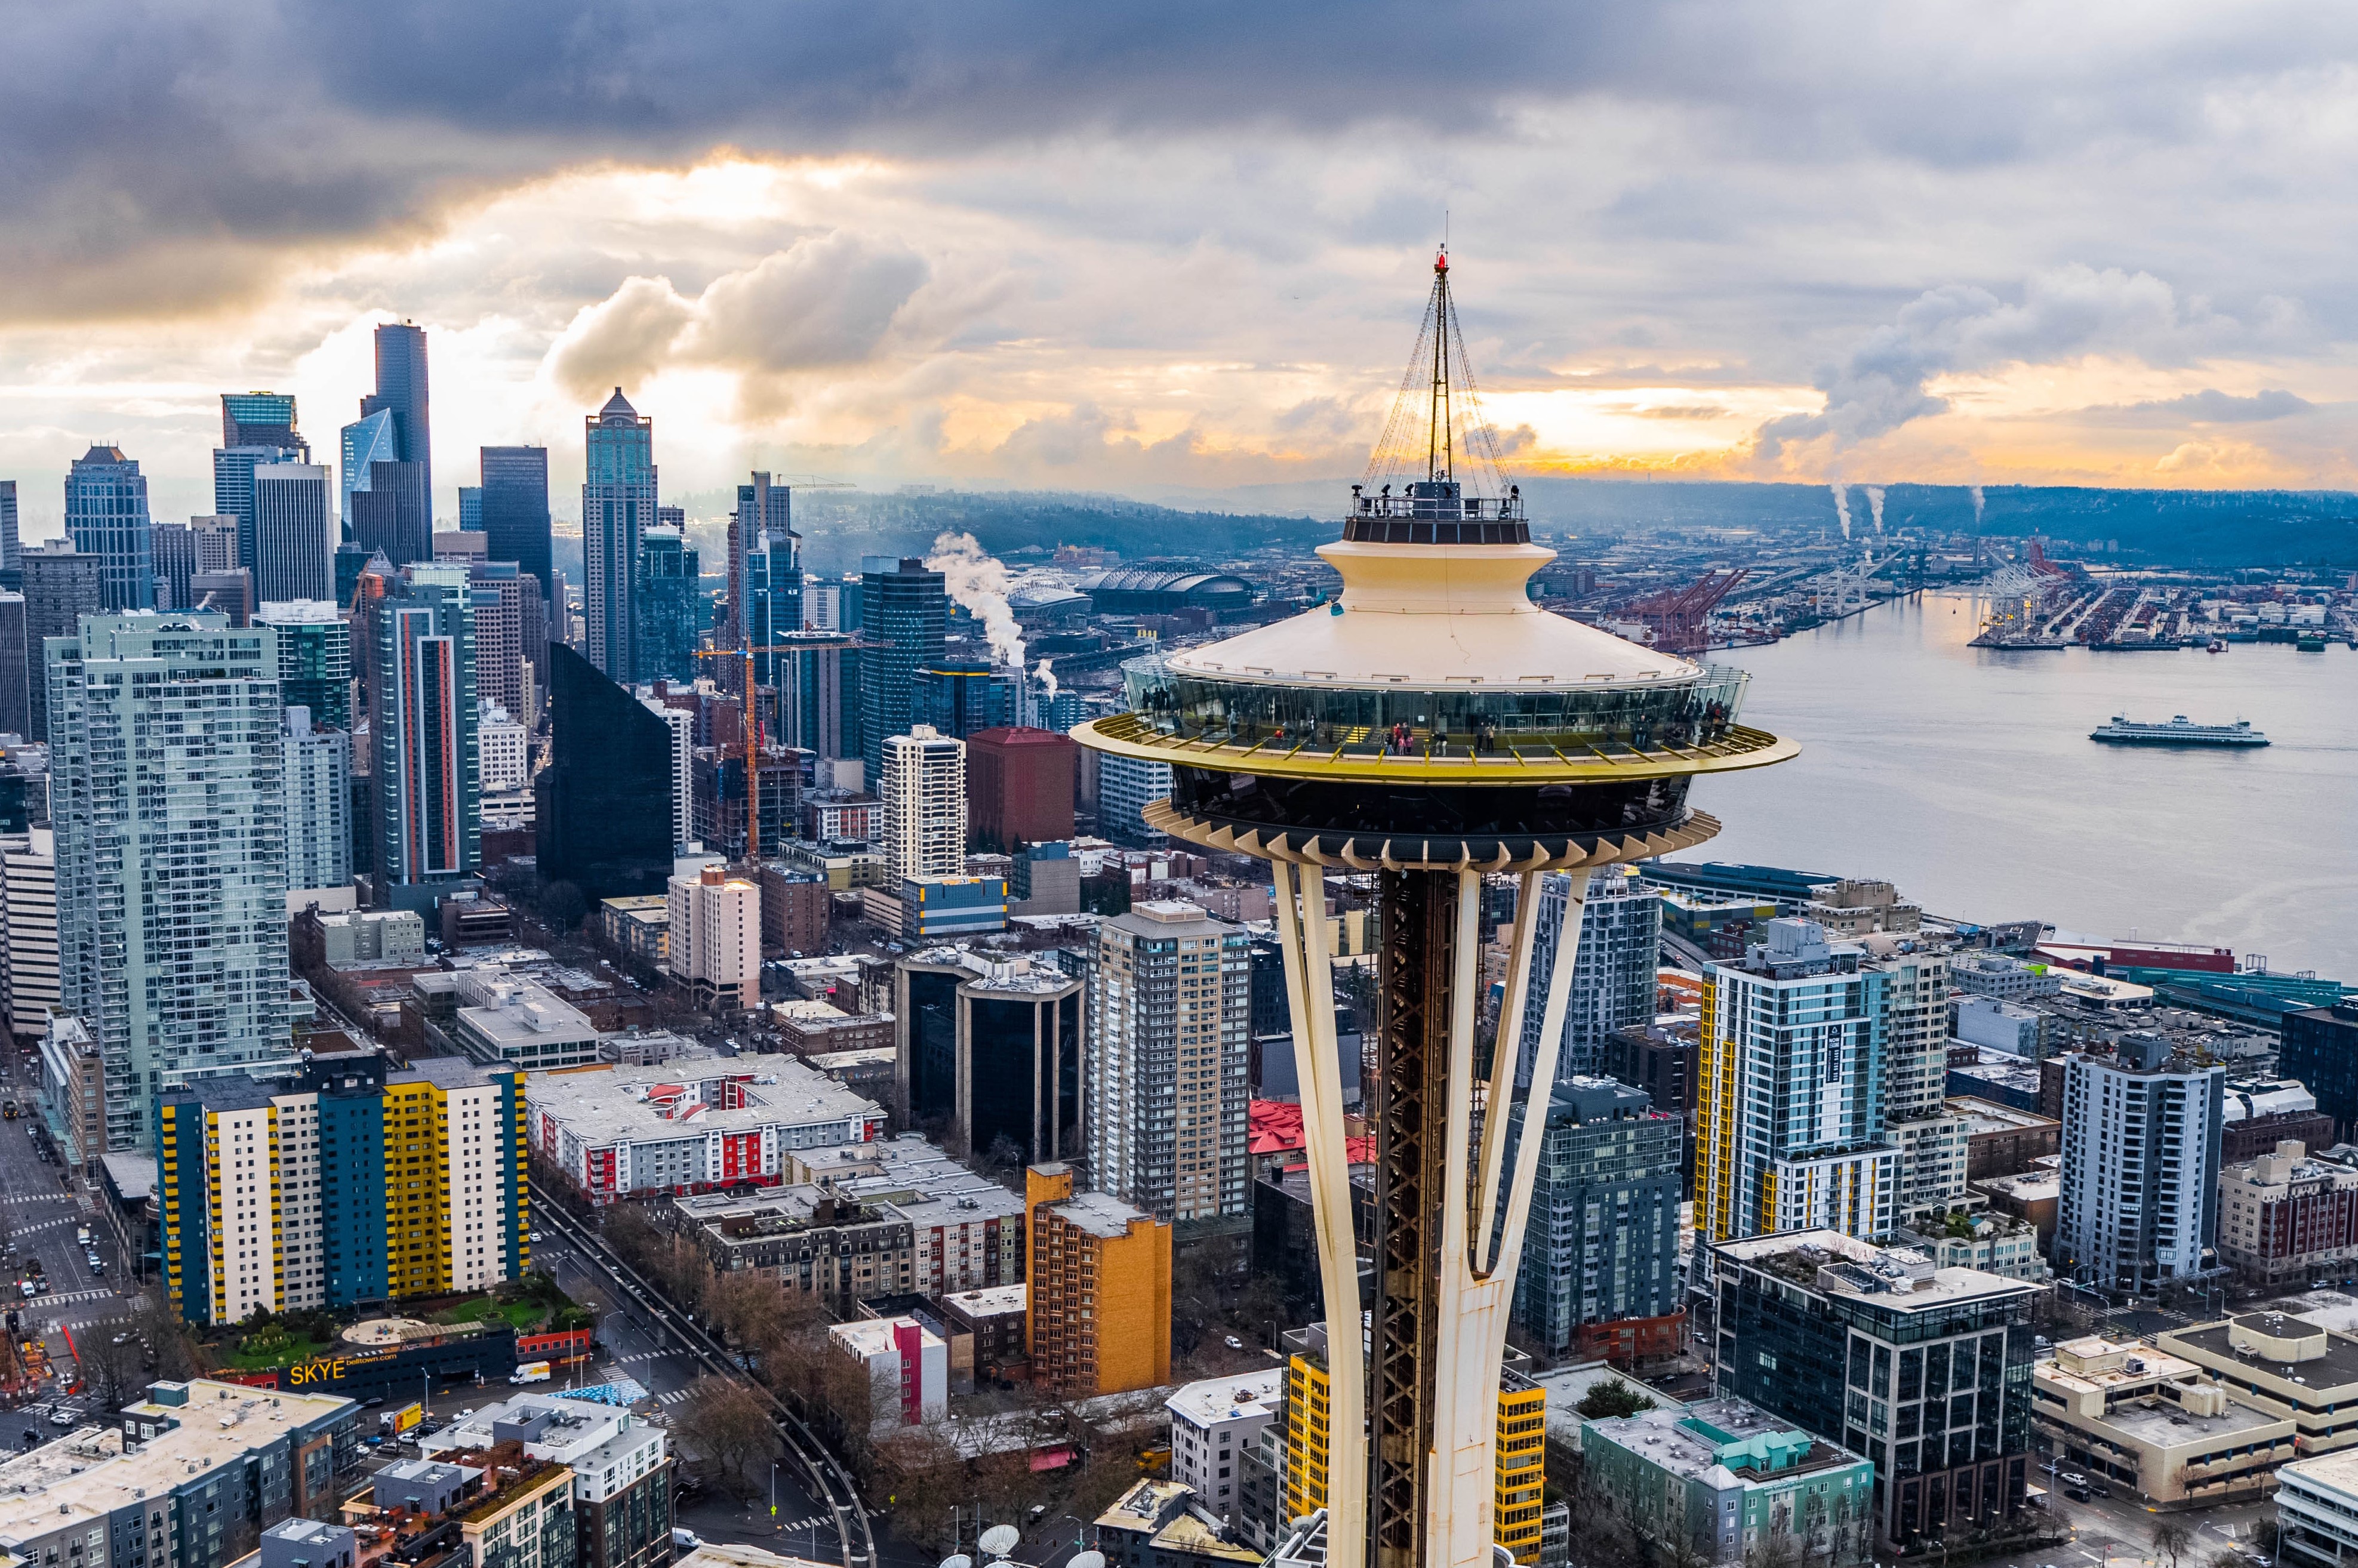 PANORAMIC PHOTO OF SEATTLE WITH SPACE NEEDLE IN THE FOREGROUND AND THE DOCK IN THE DISTANCE